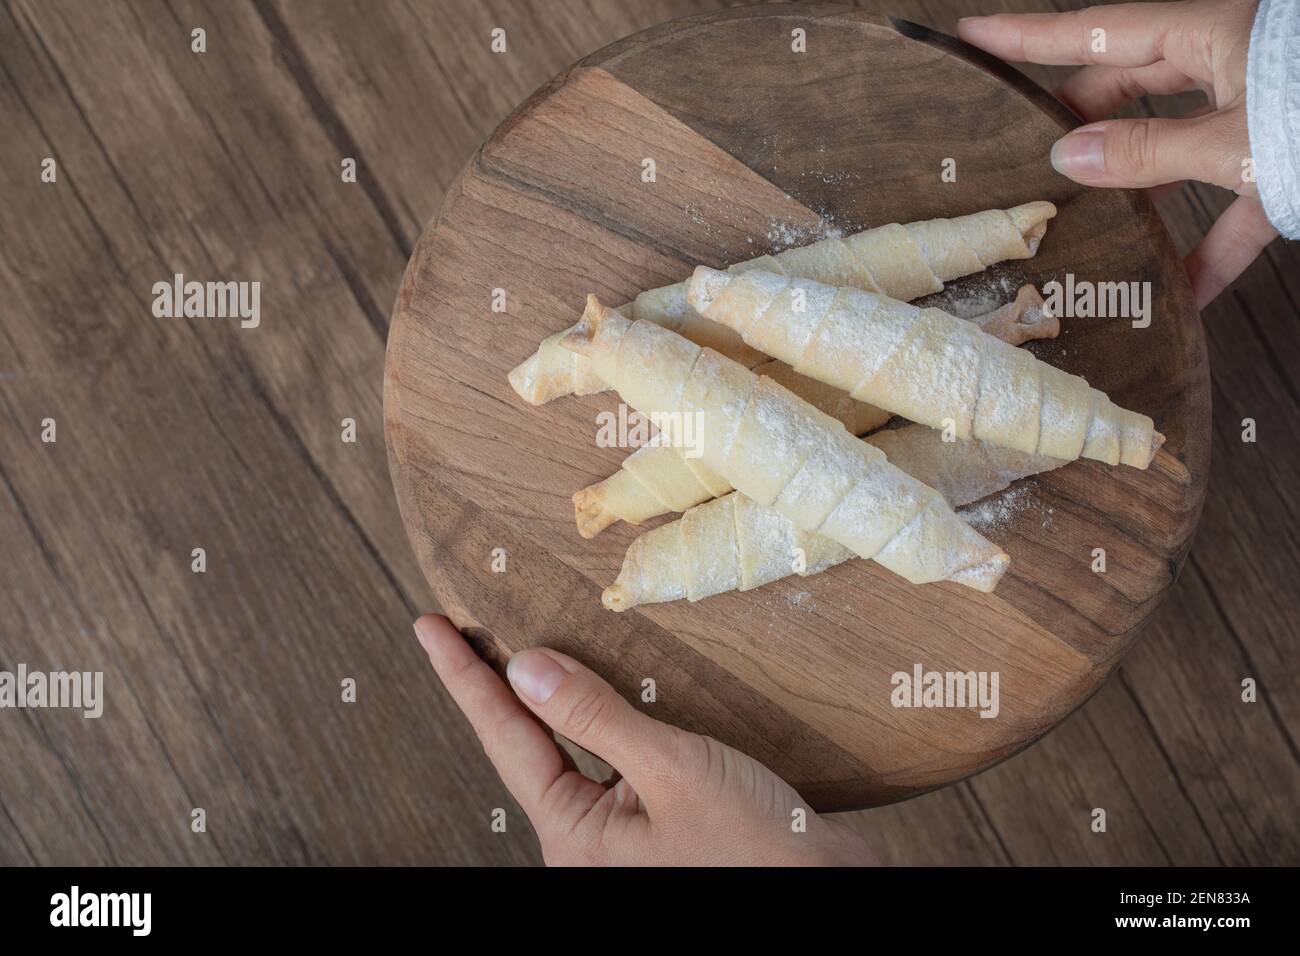 Holding mutaki cookies on a wooden board in the hand Stock Photo